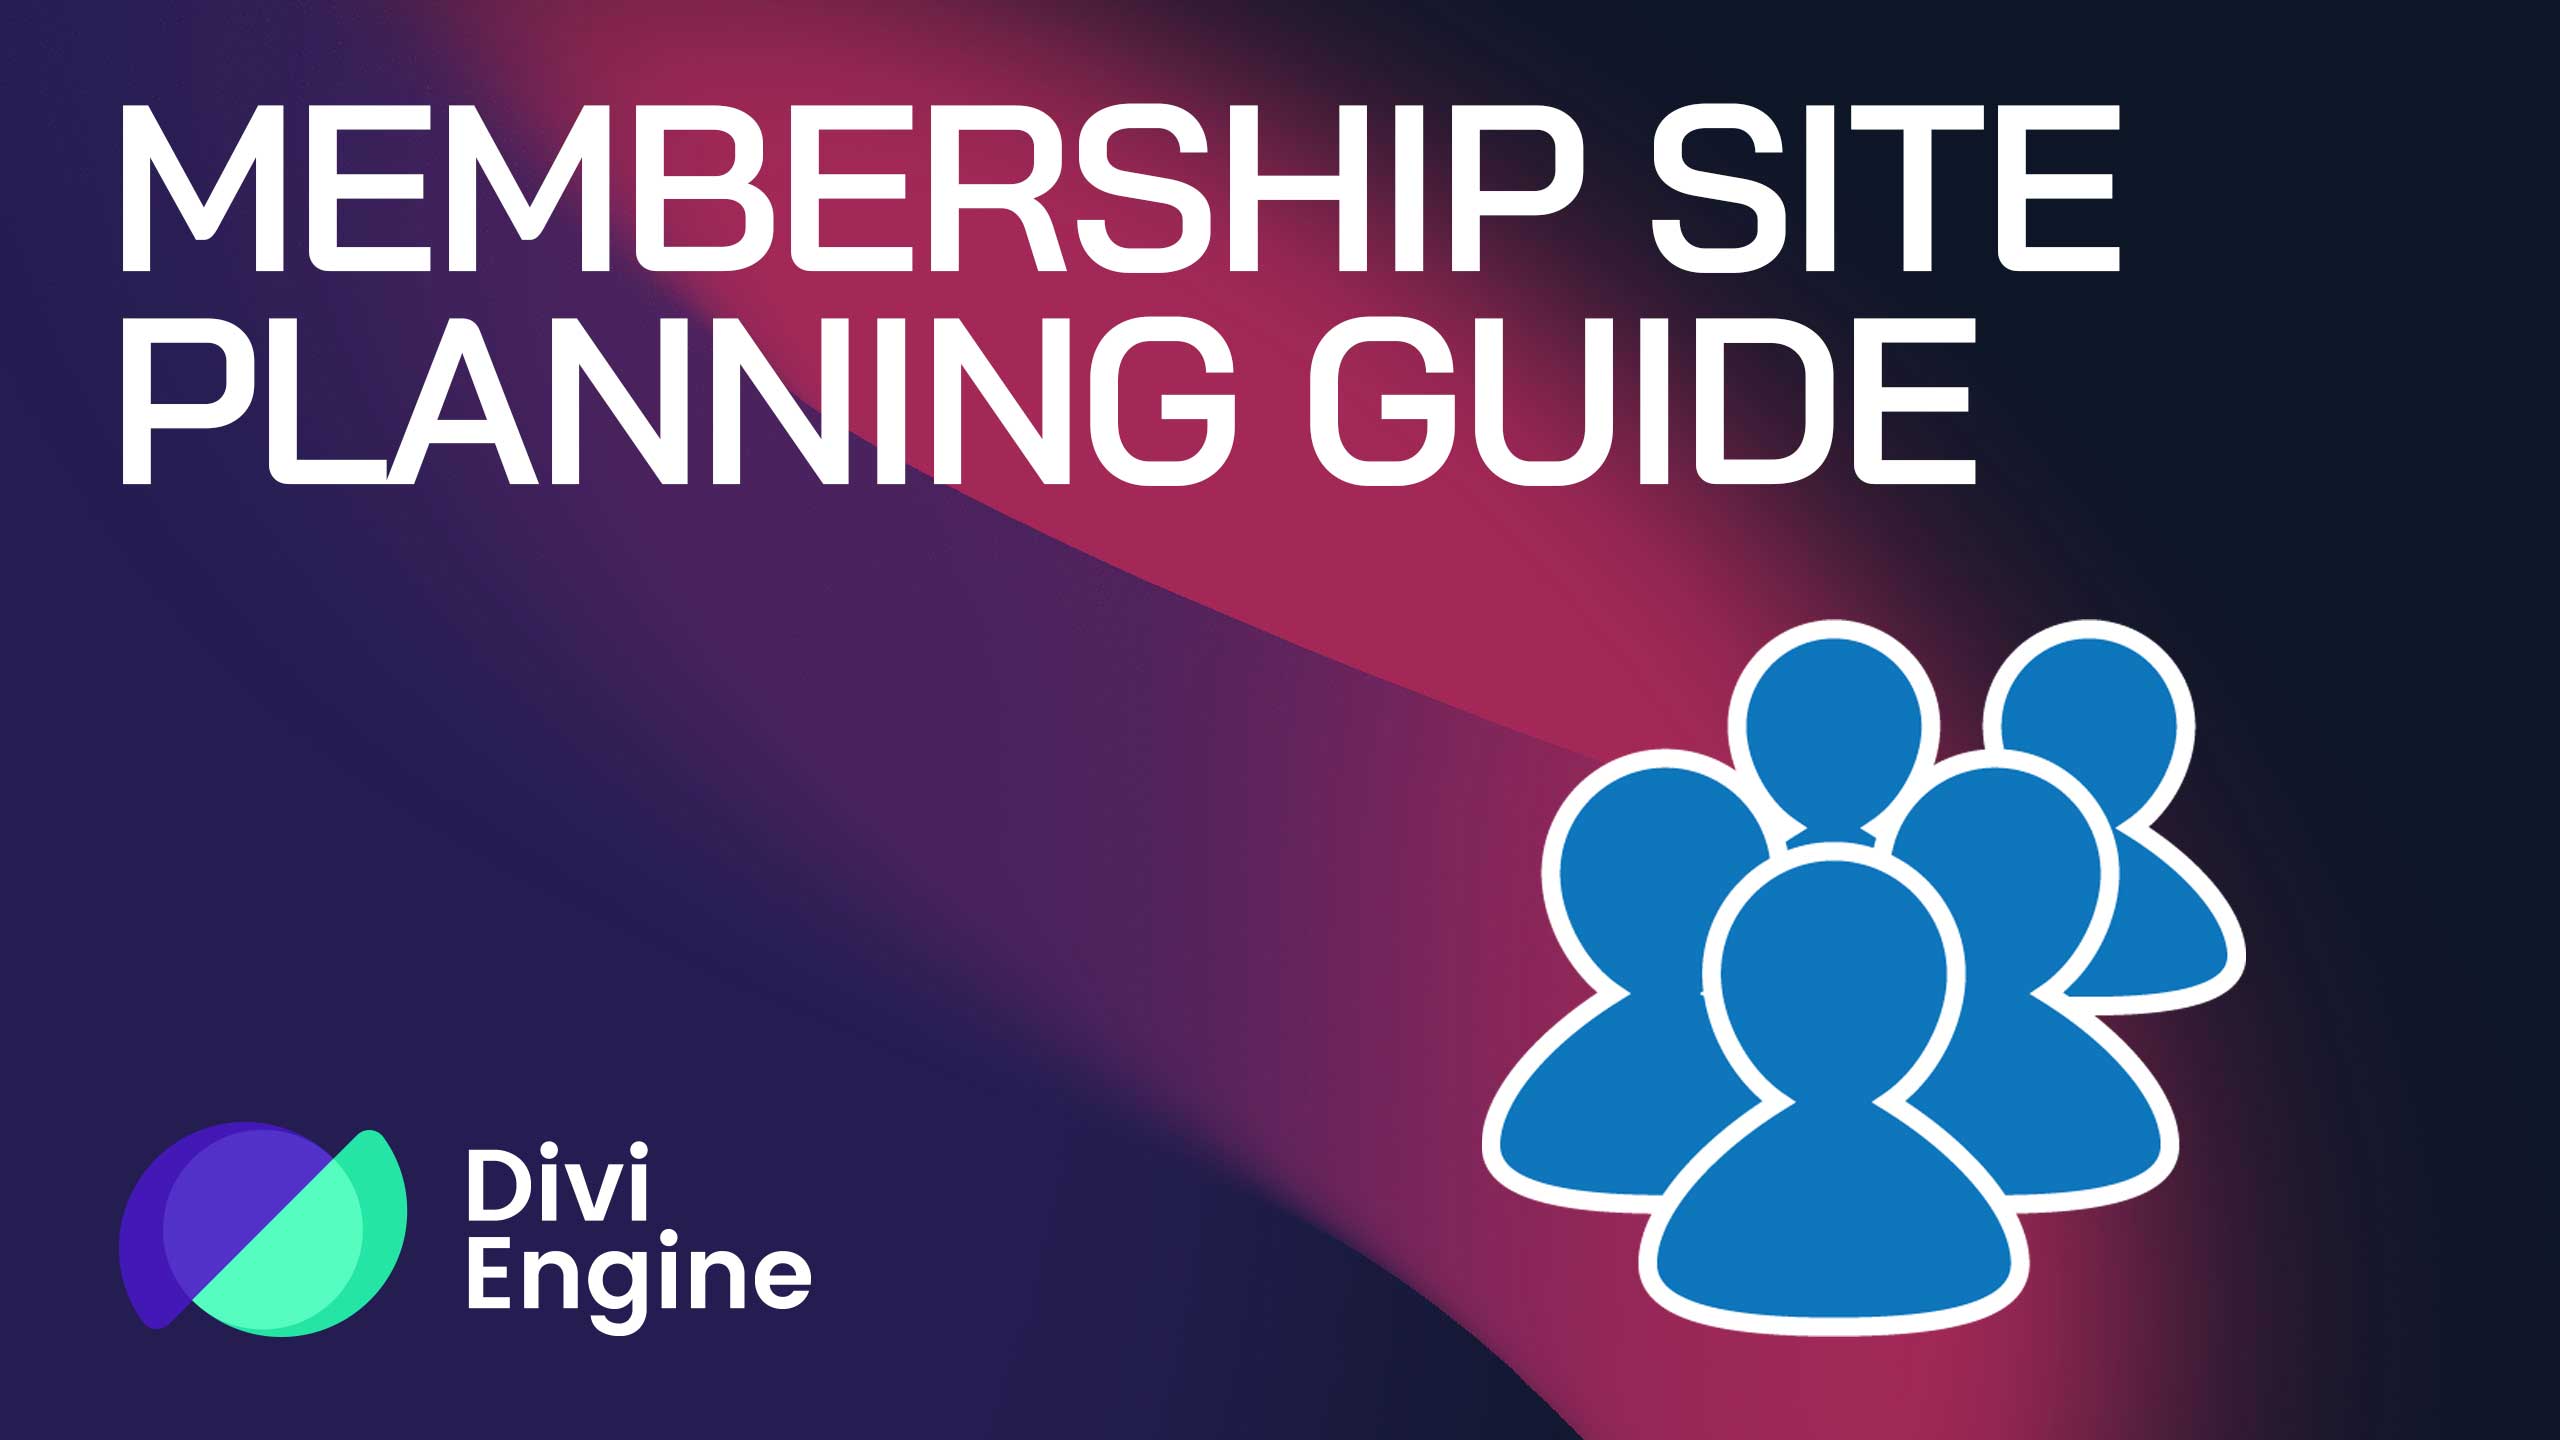 How to Plan Your Membership Site: A Comprehensive Guide